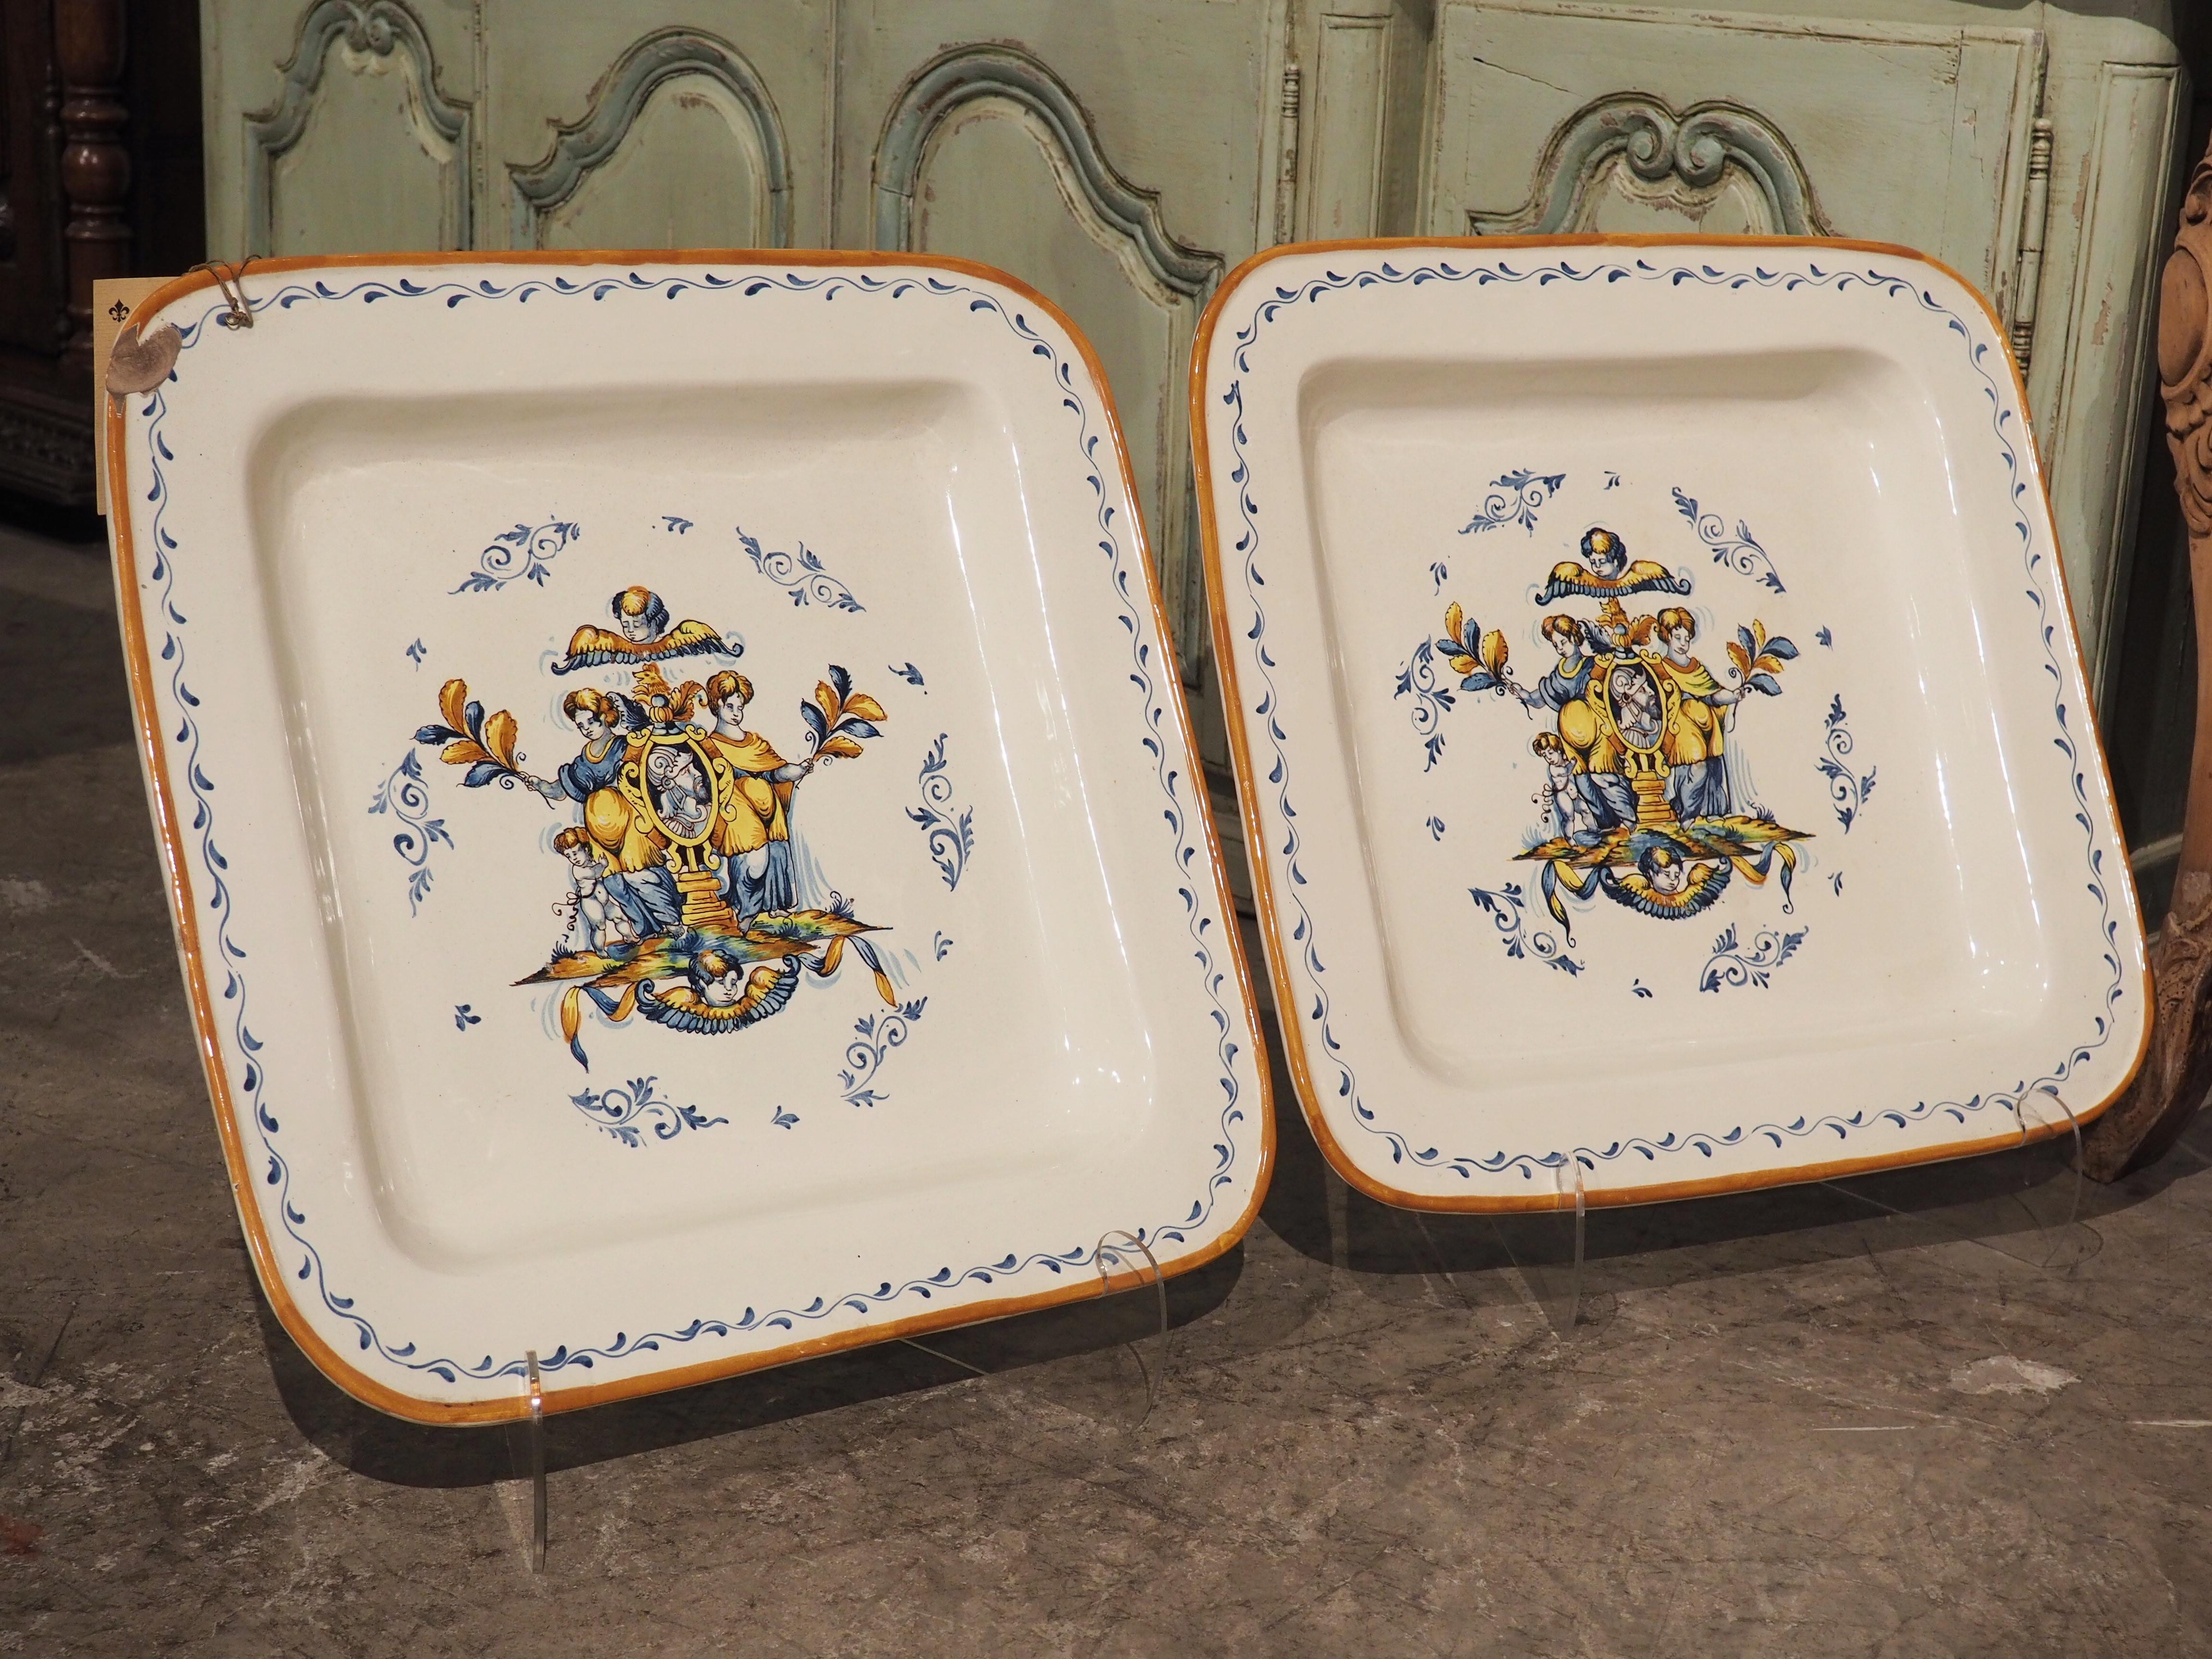 Renaissance Pair of Large Hand Painted Ceramic Square Platters from Italy For Sale